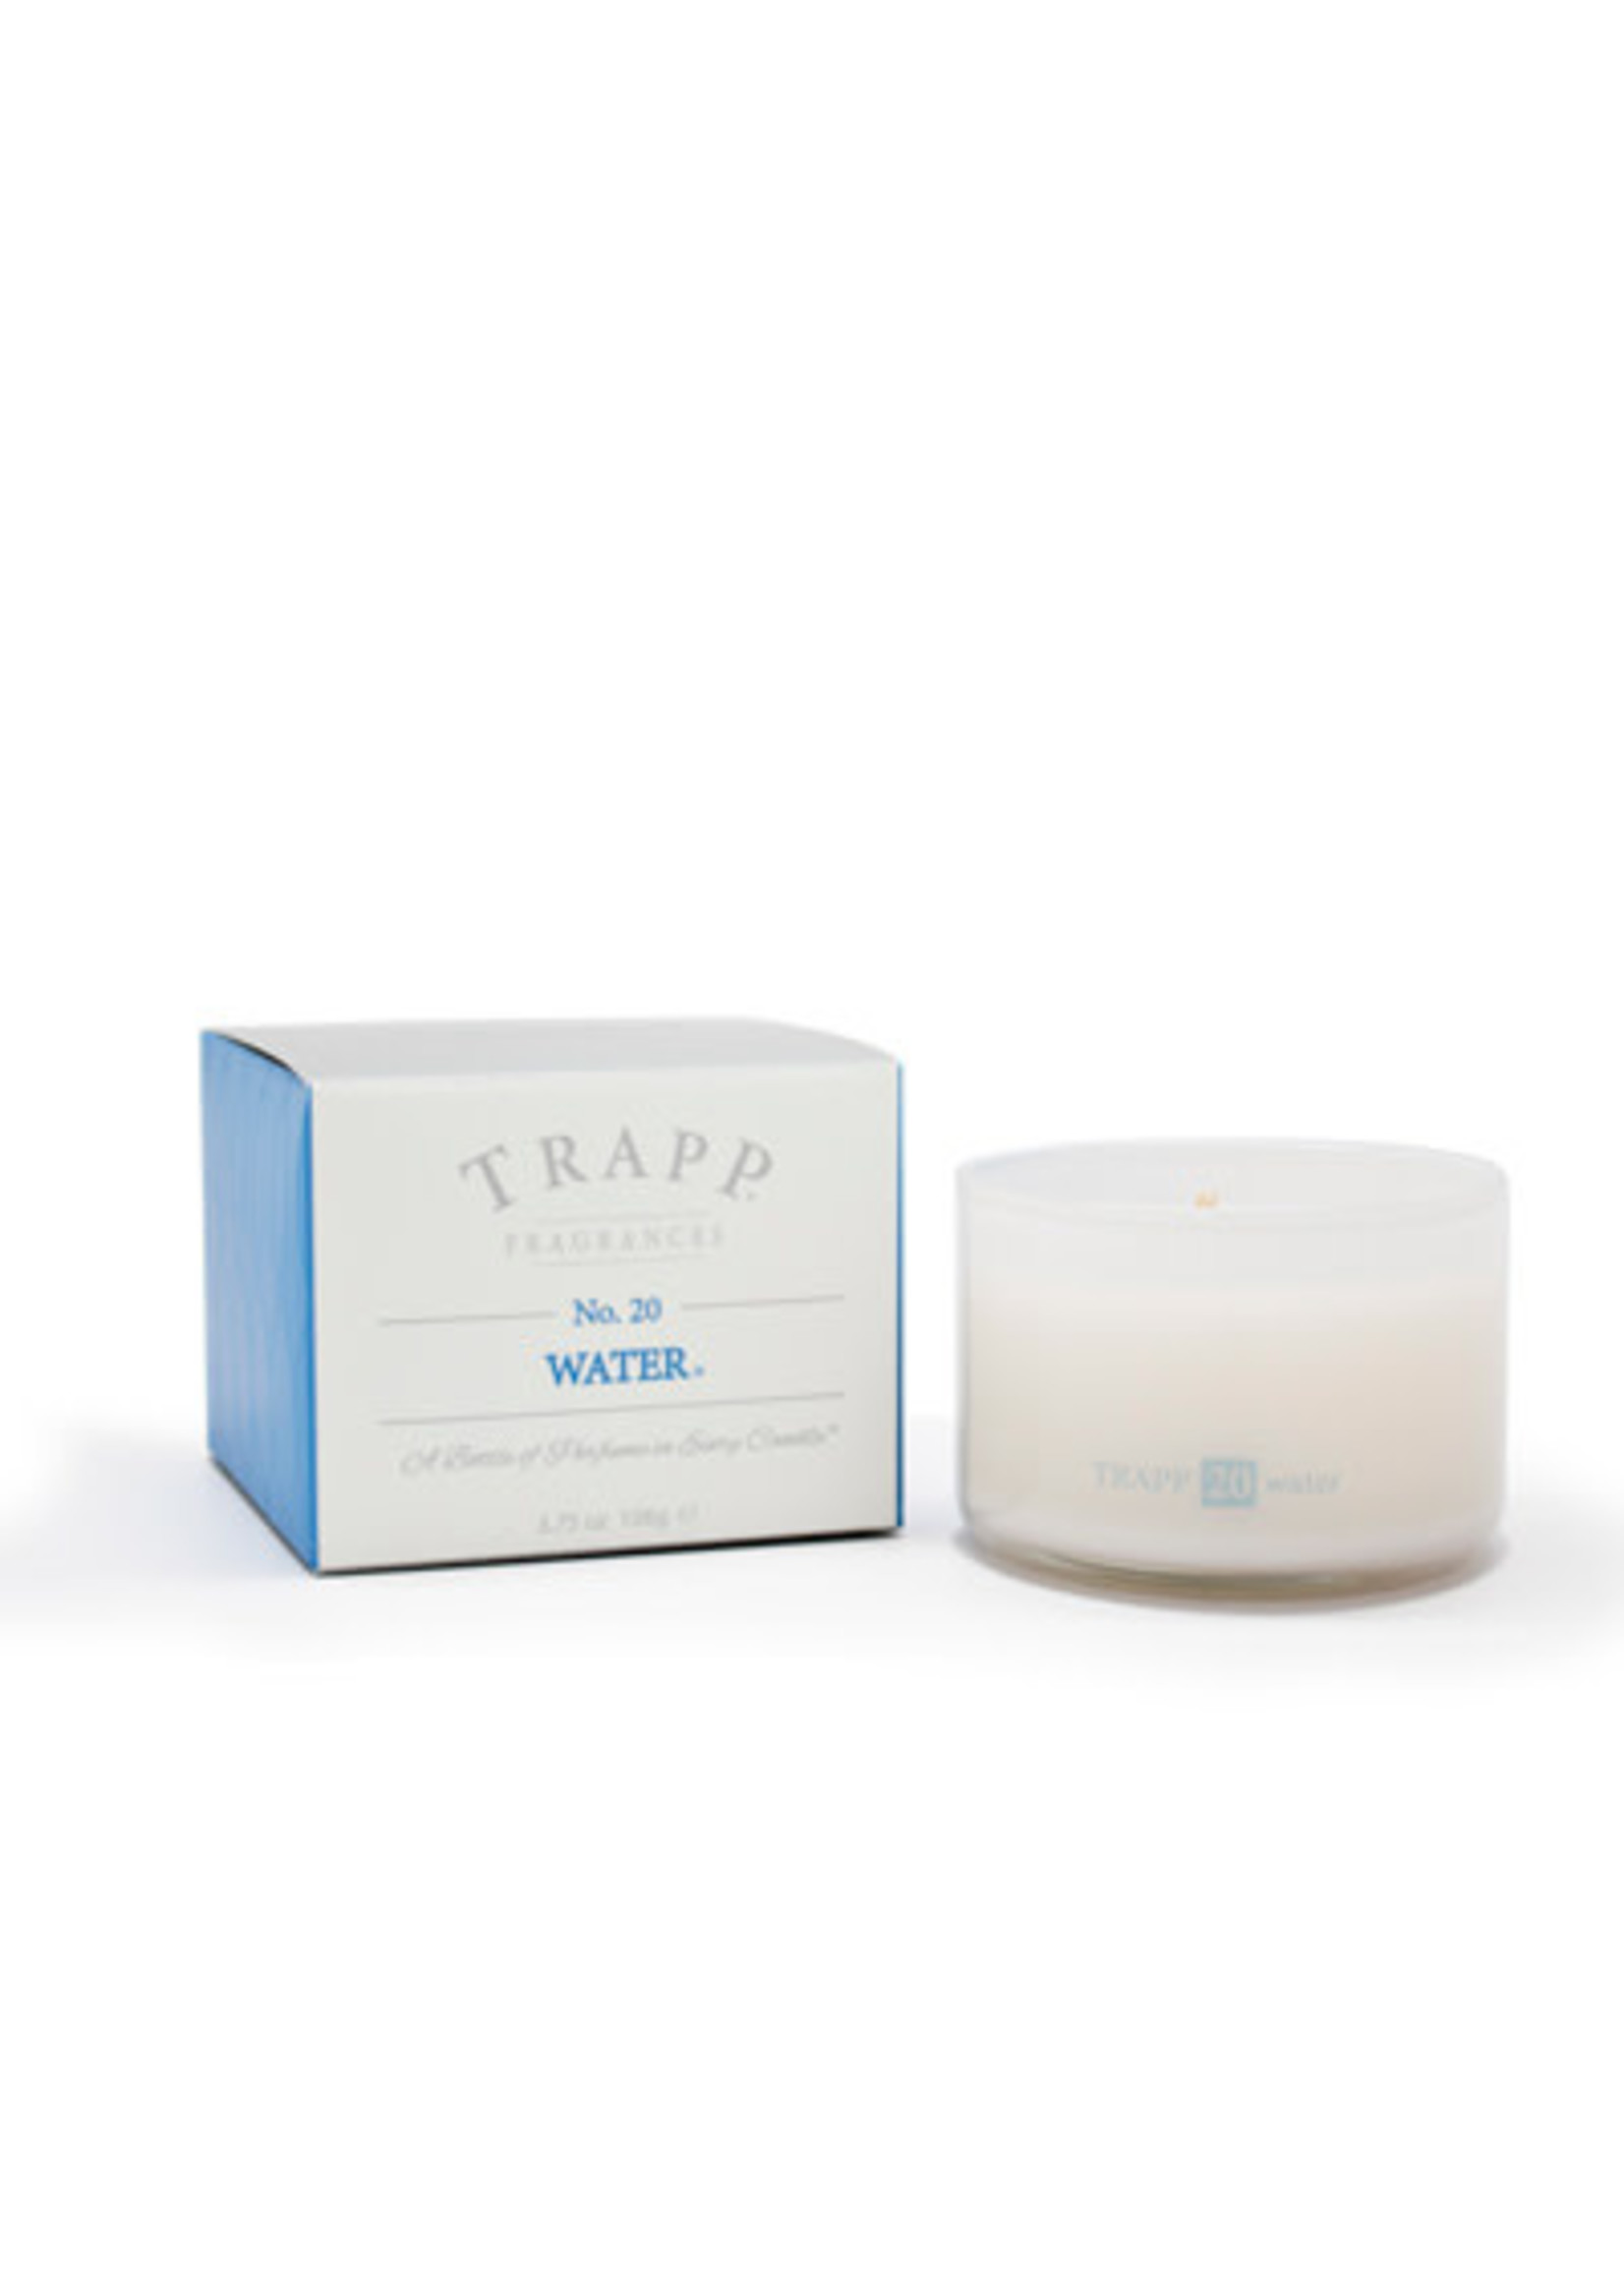 Trapp Candles Ambiance Collection - No. 20 Water - 3.75 oz. Poured Candle